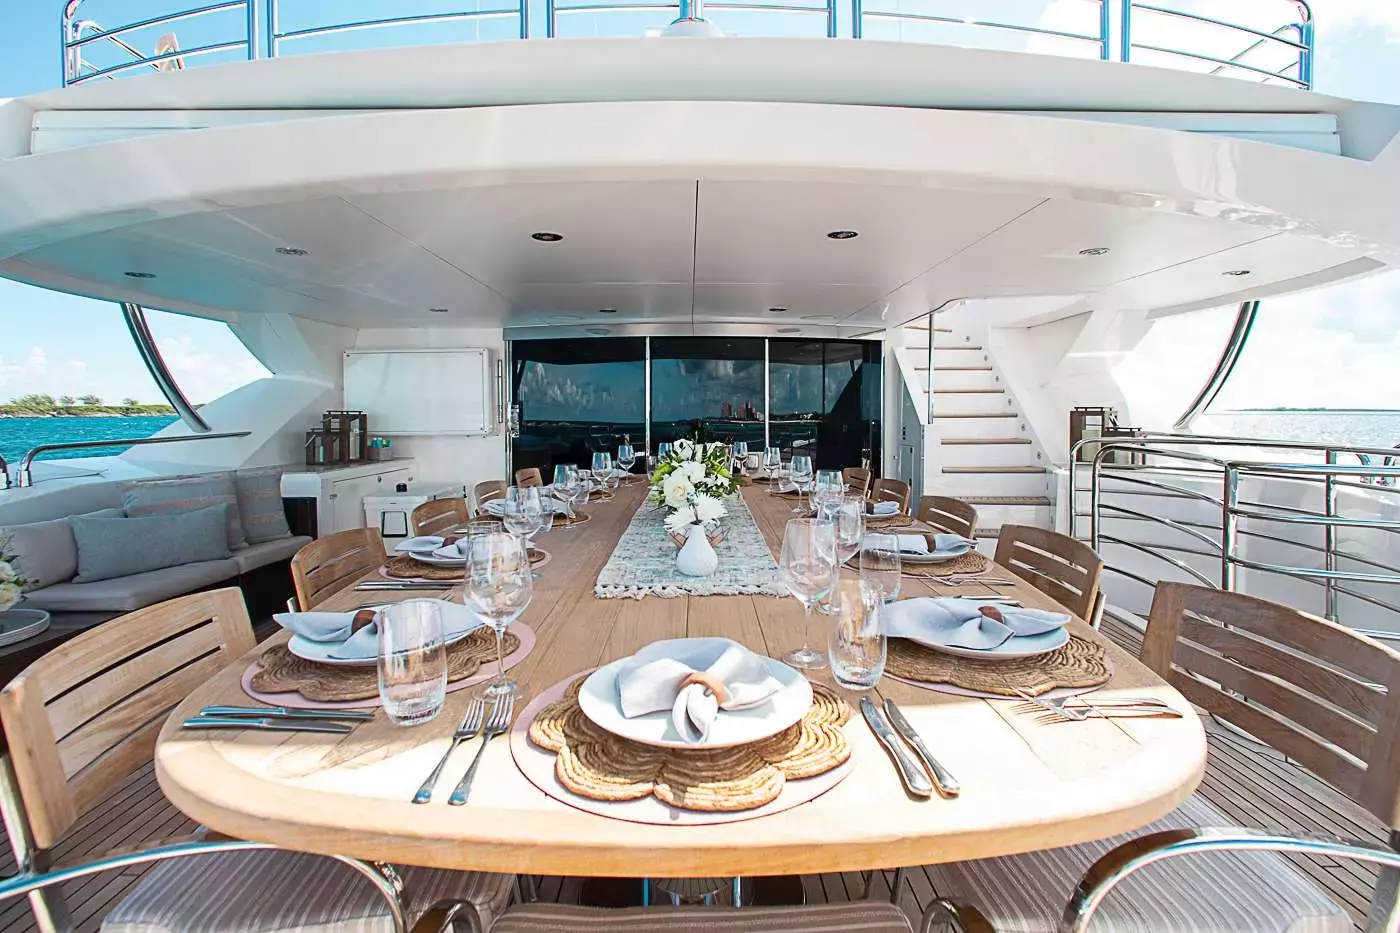 Acacia by Sunseeker - Top rates for a Rental of a private Superyacht in Antigua and Barbuda